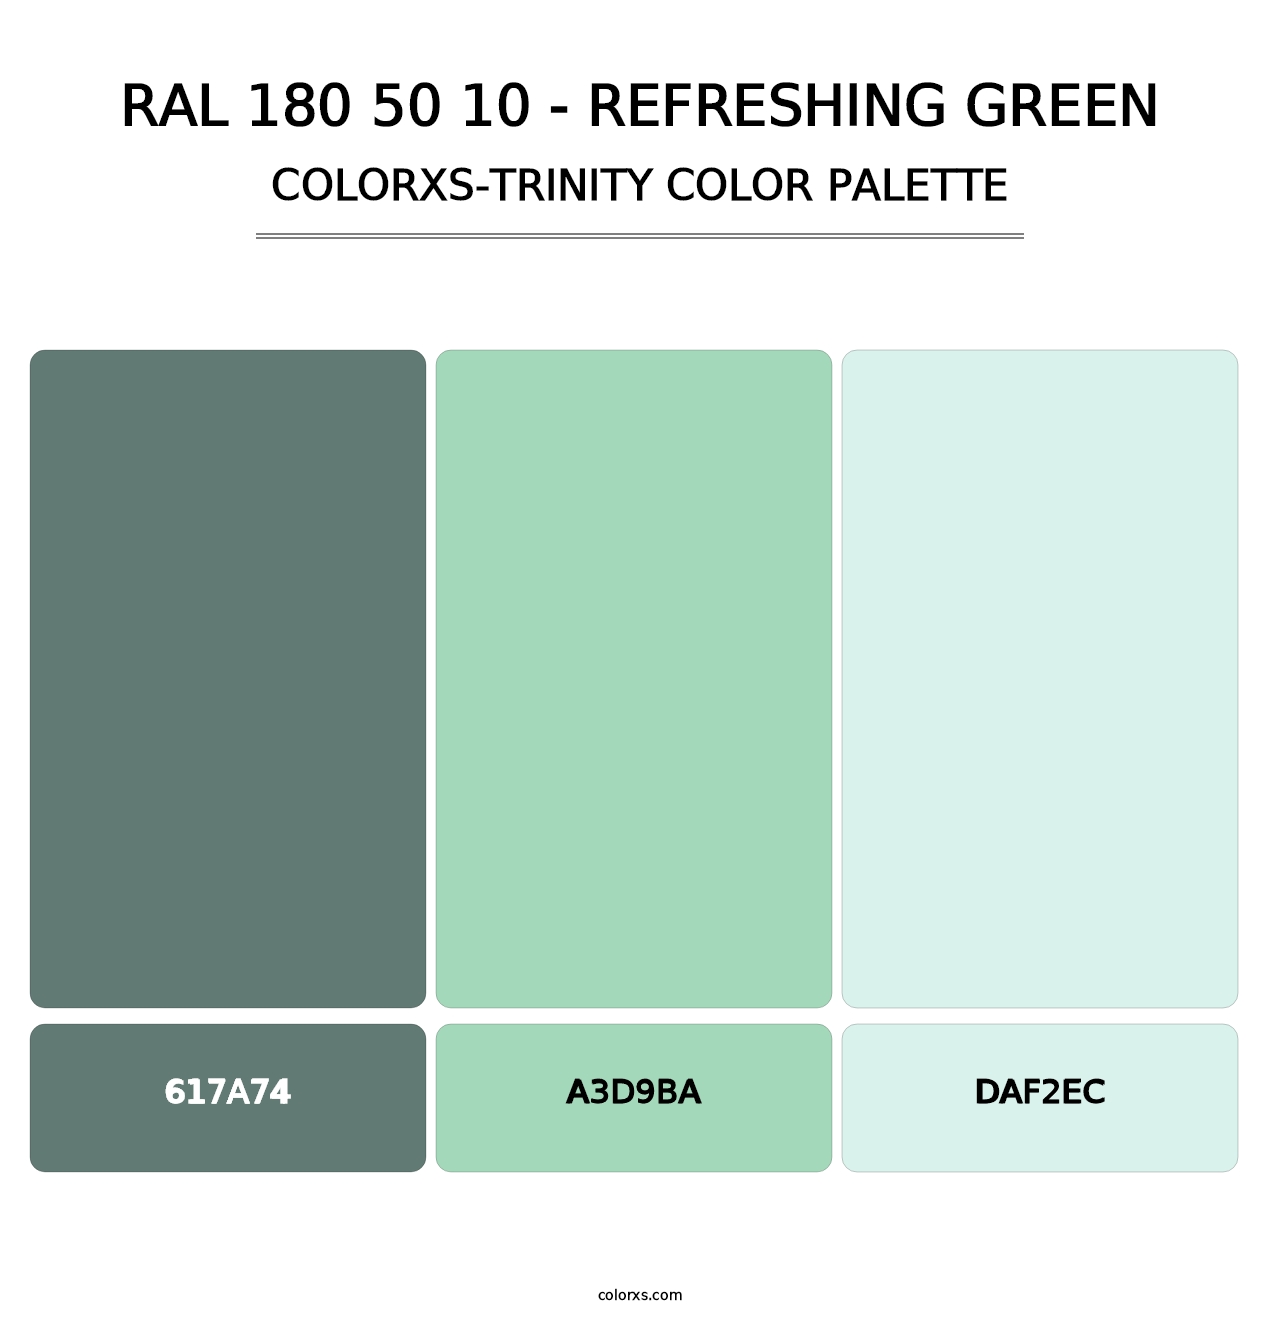 RAL 180 50 10 - Refreshing Green - Colorxs Trinity Palette